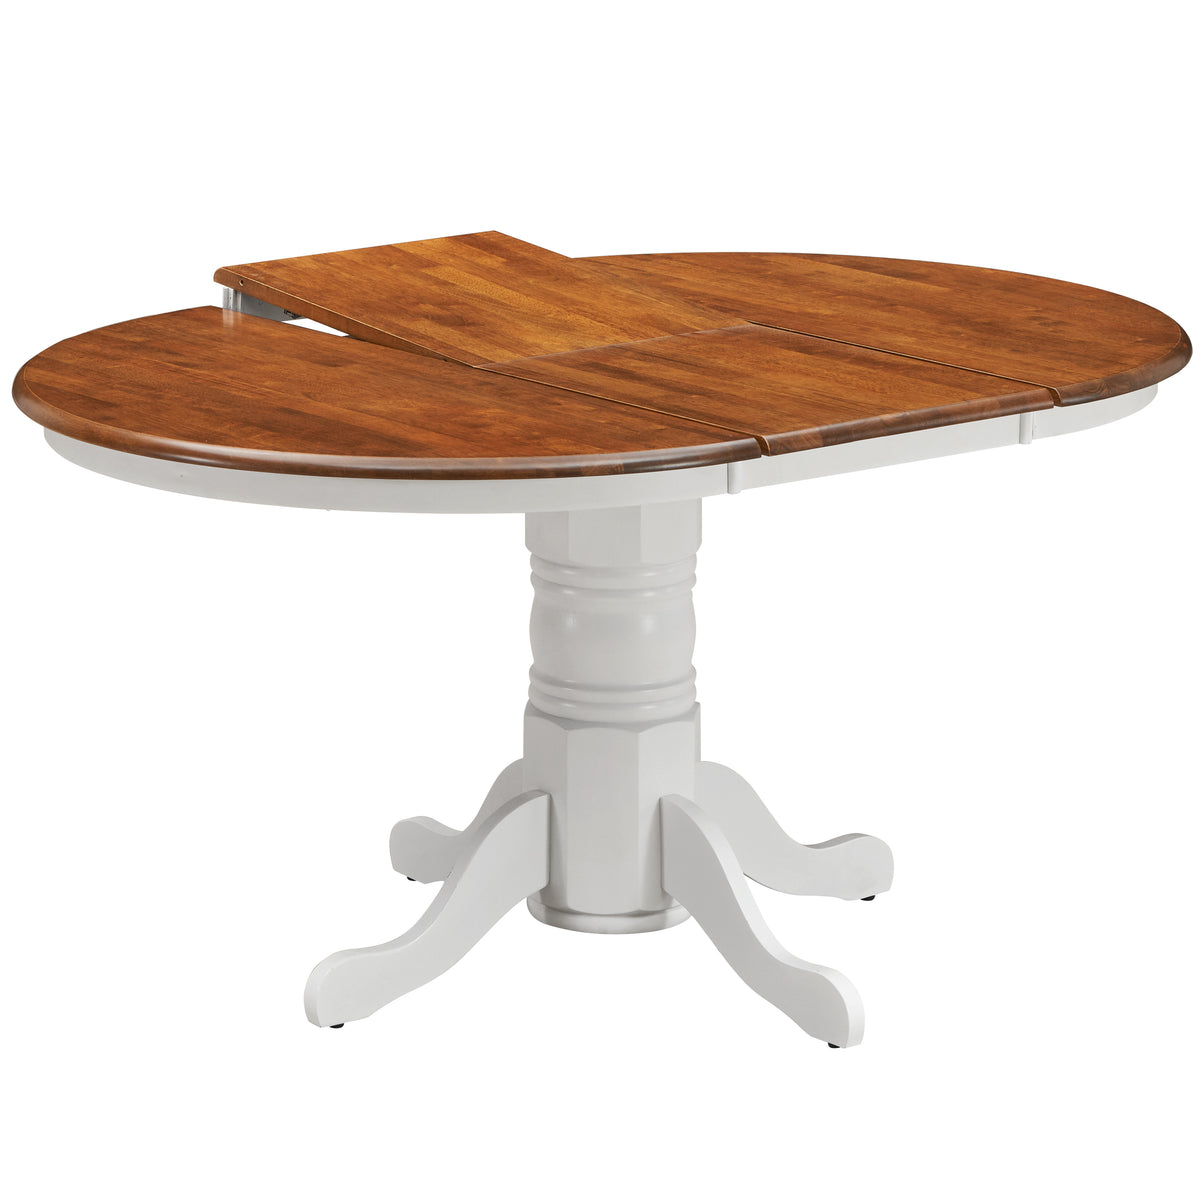 Lupin Extendable Dining Table 150cm Pedestral Stand Solid Rubber Wood -White Oak